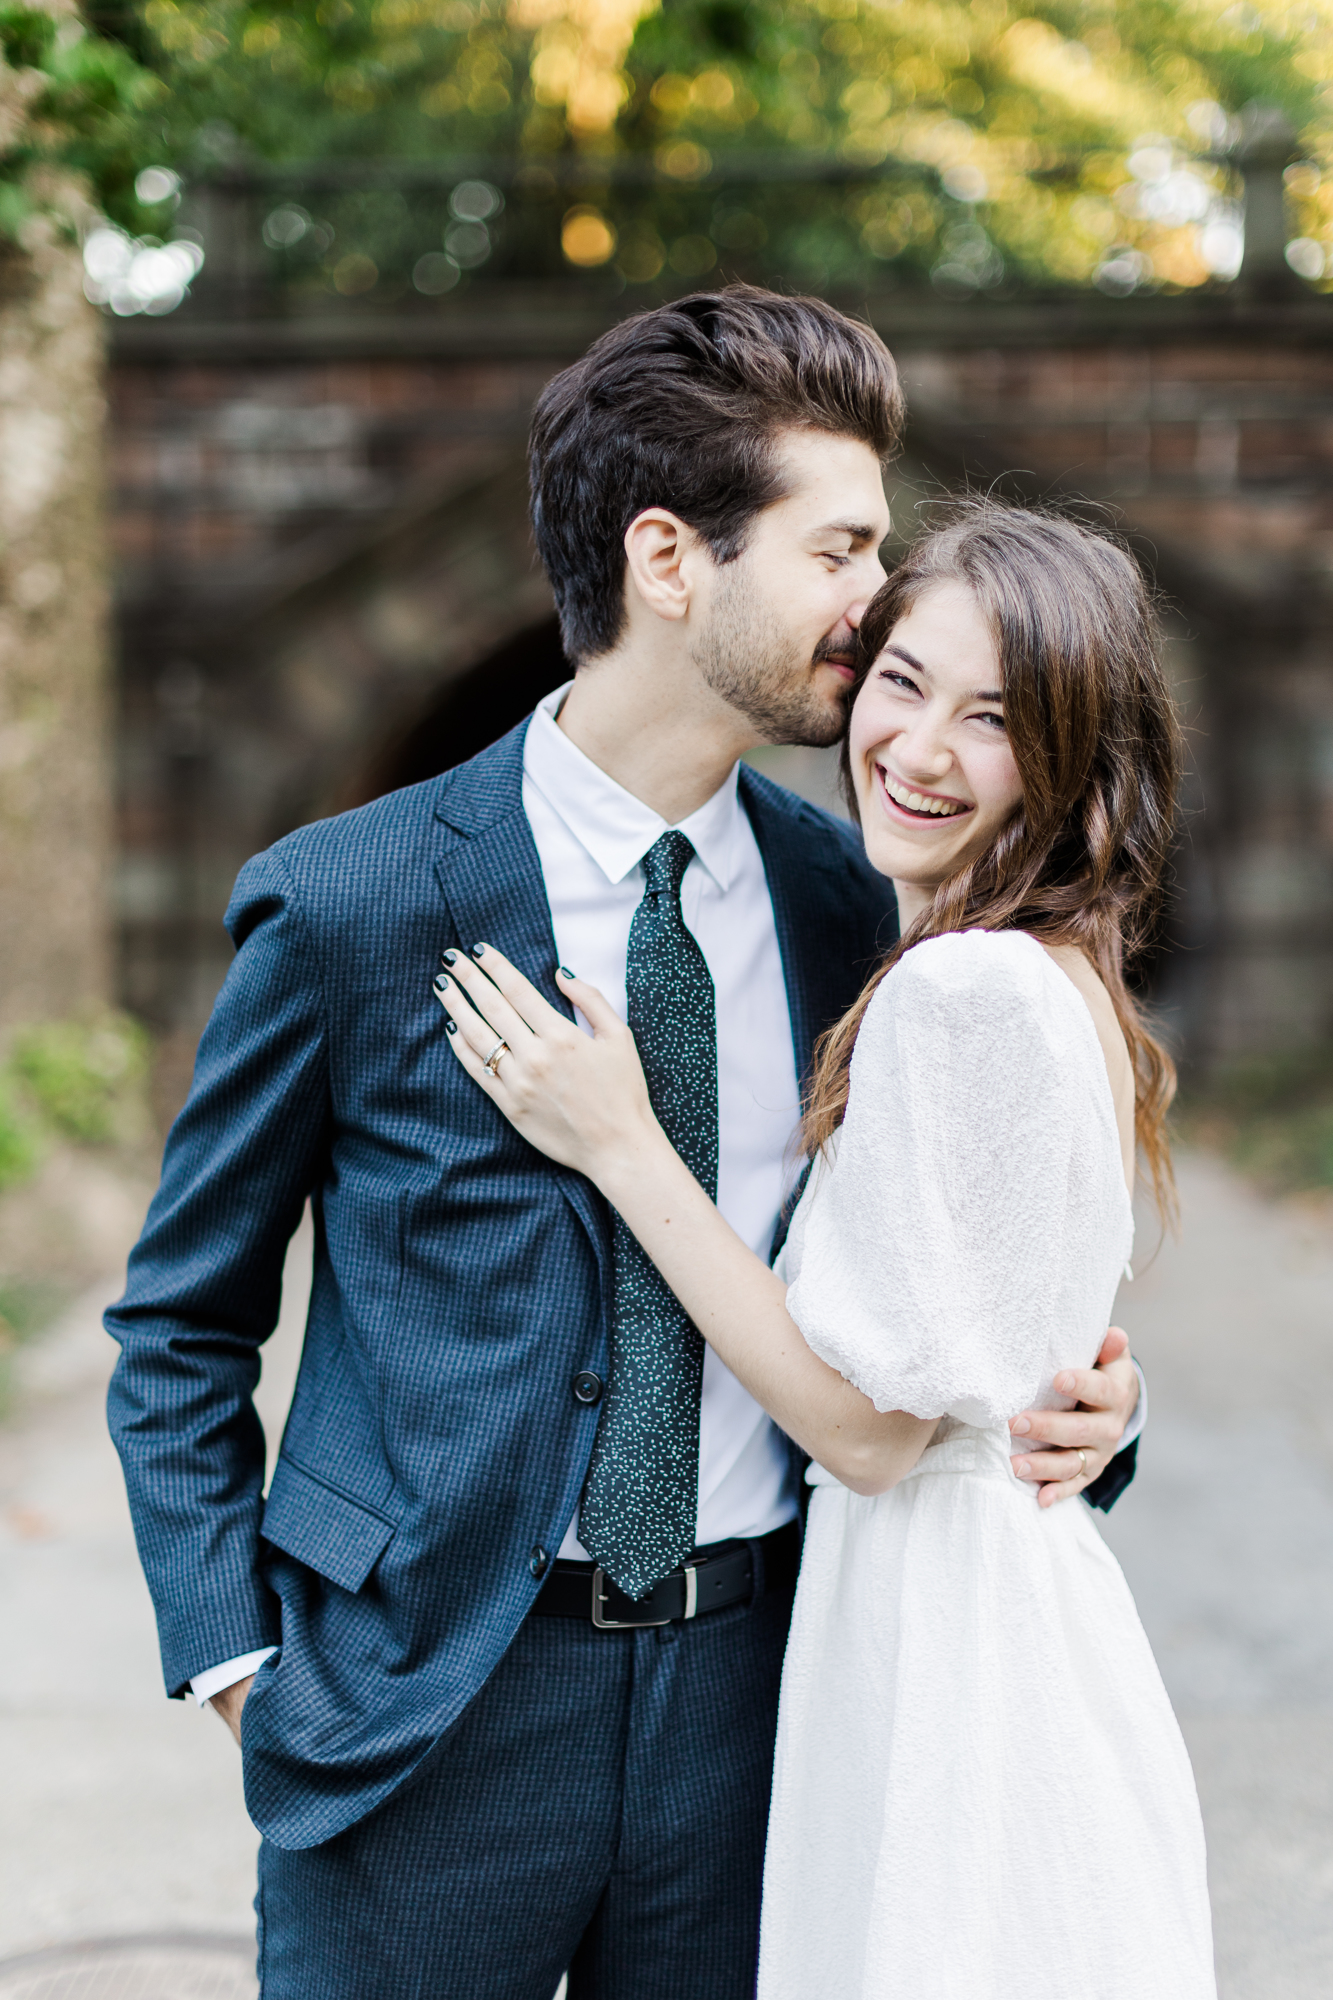 Joyful Central Park Engagement Photos in NYC